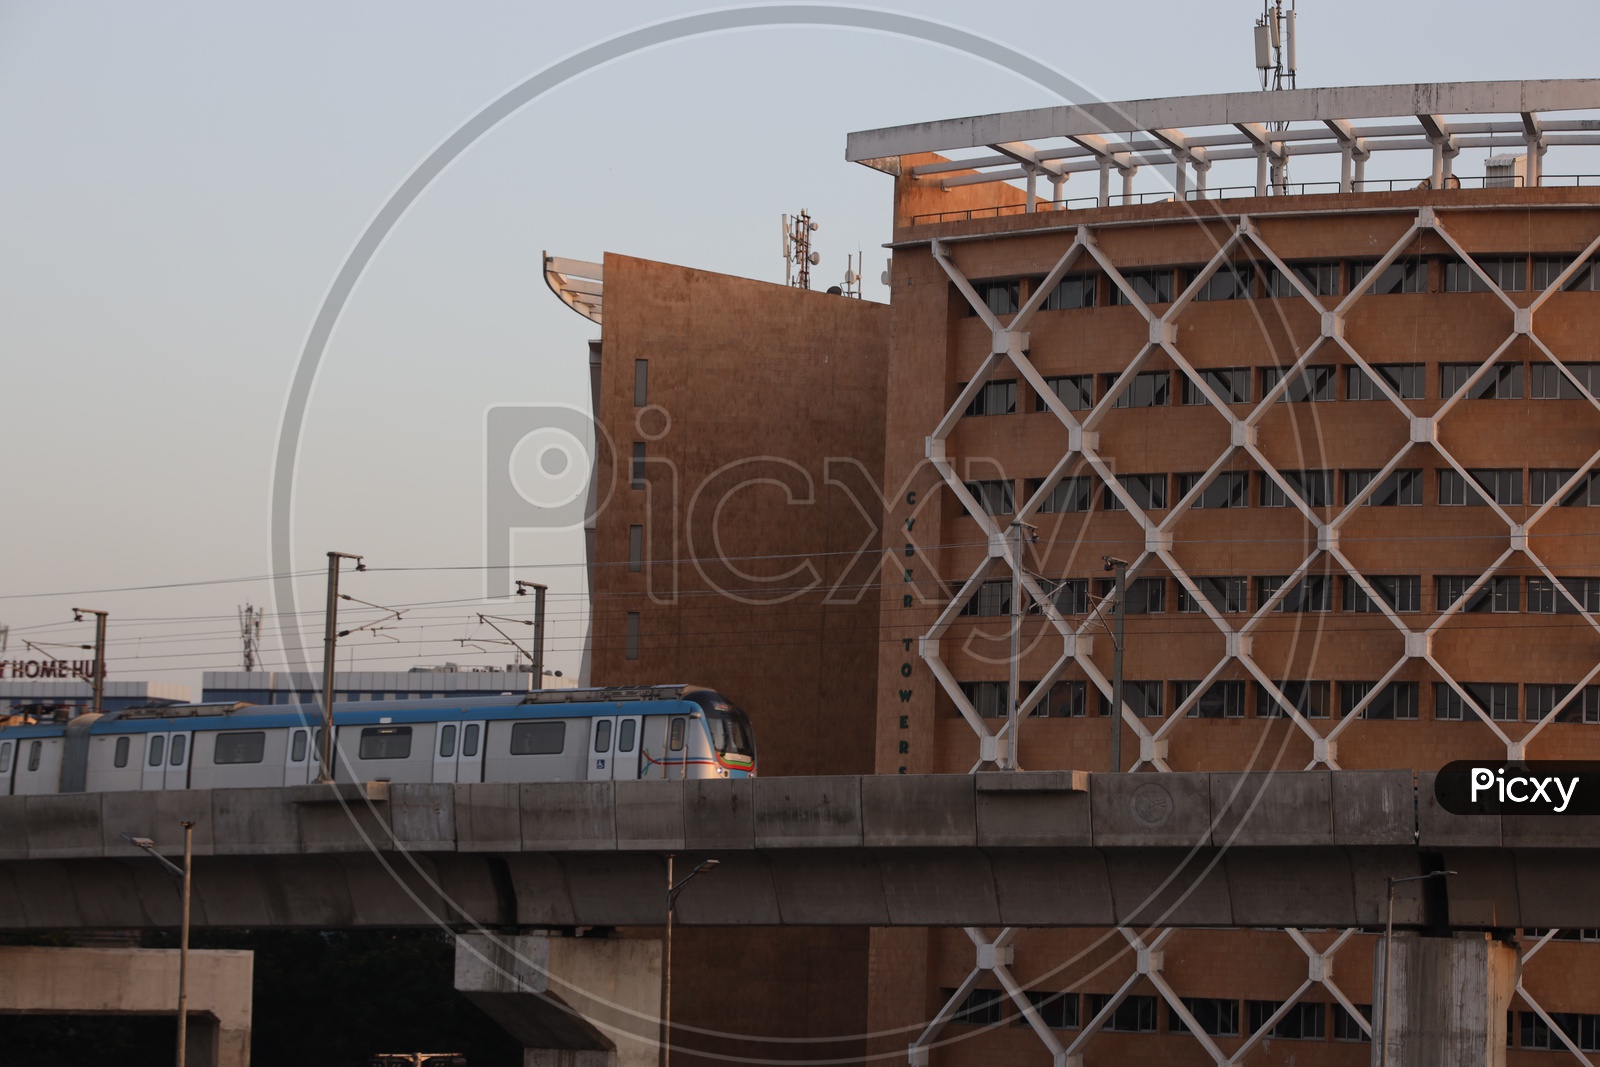 Hyderabad Metro Train  Running on track Composition With Cyber Towers In Background